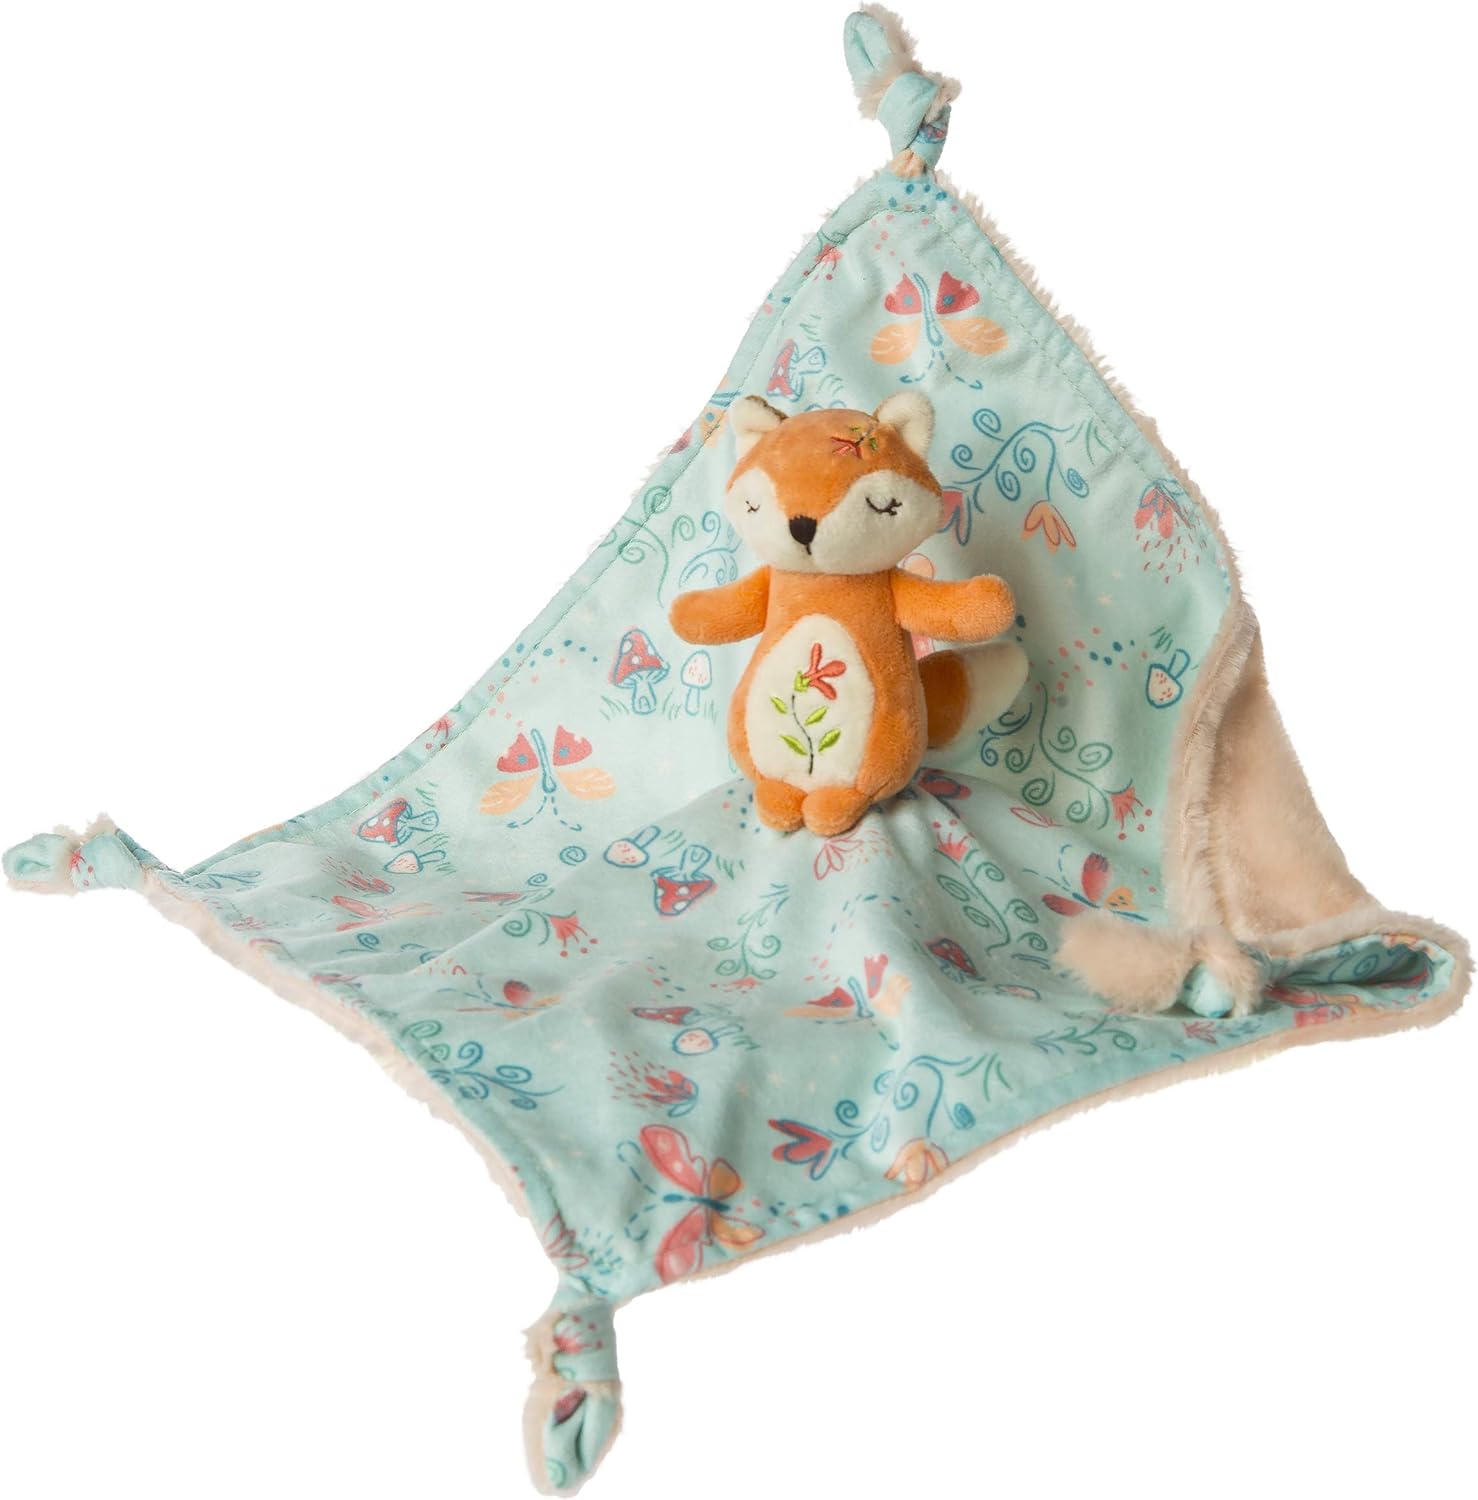 Light pink and blue comforter with a 'fairyland forest' design and an attached soft fox